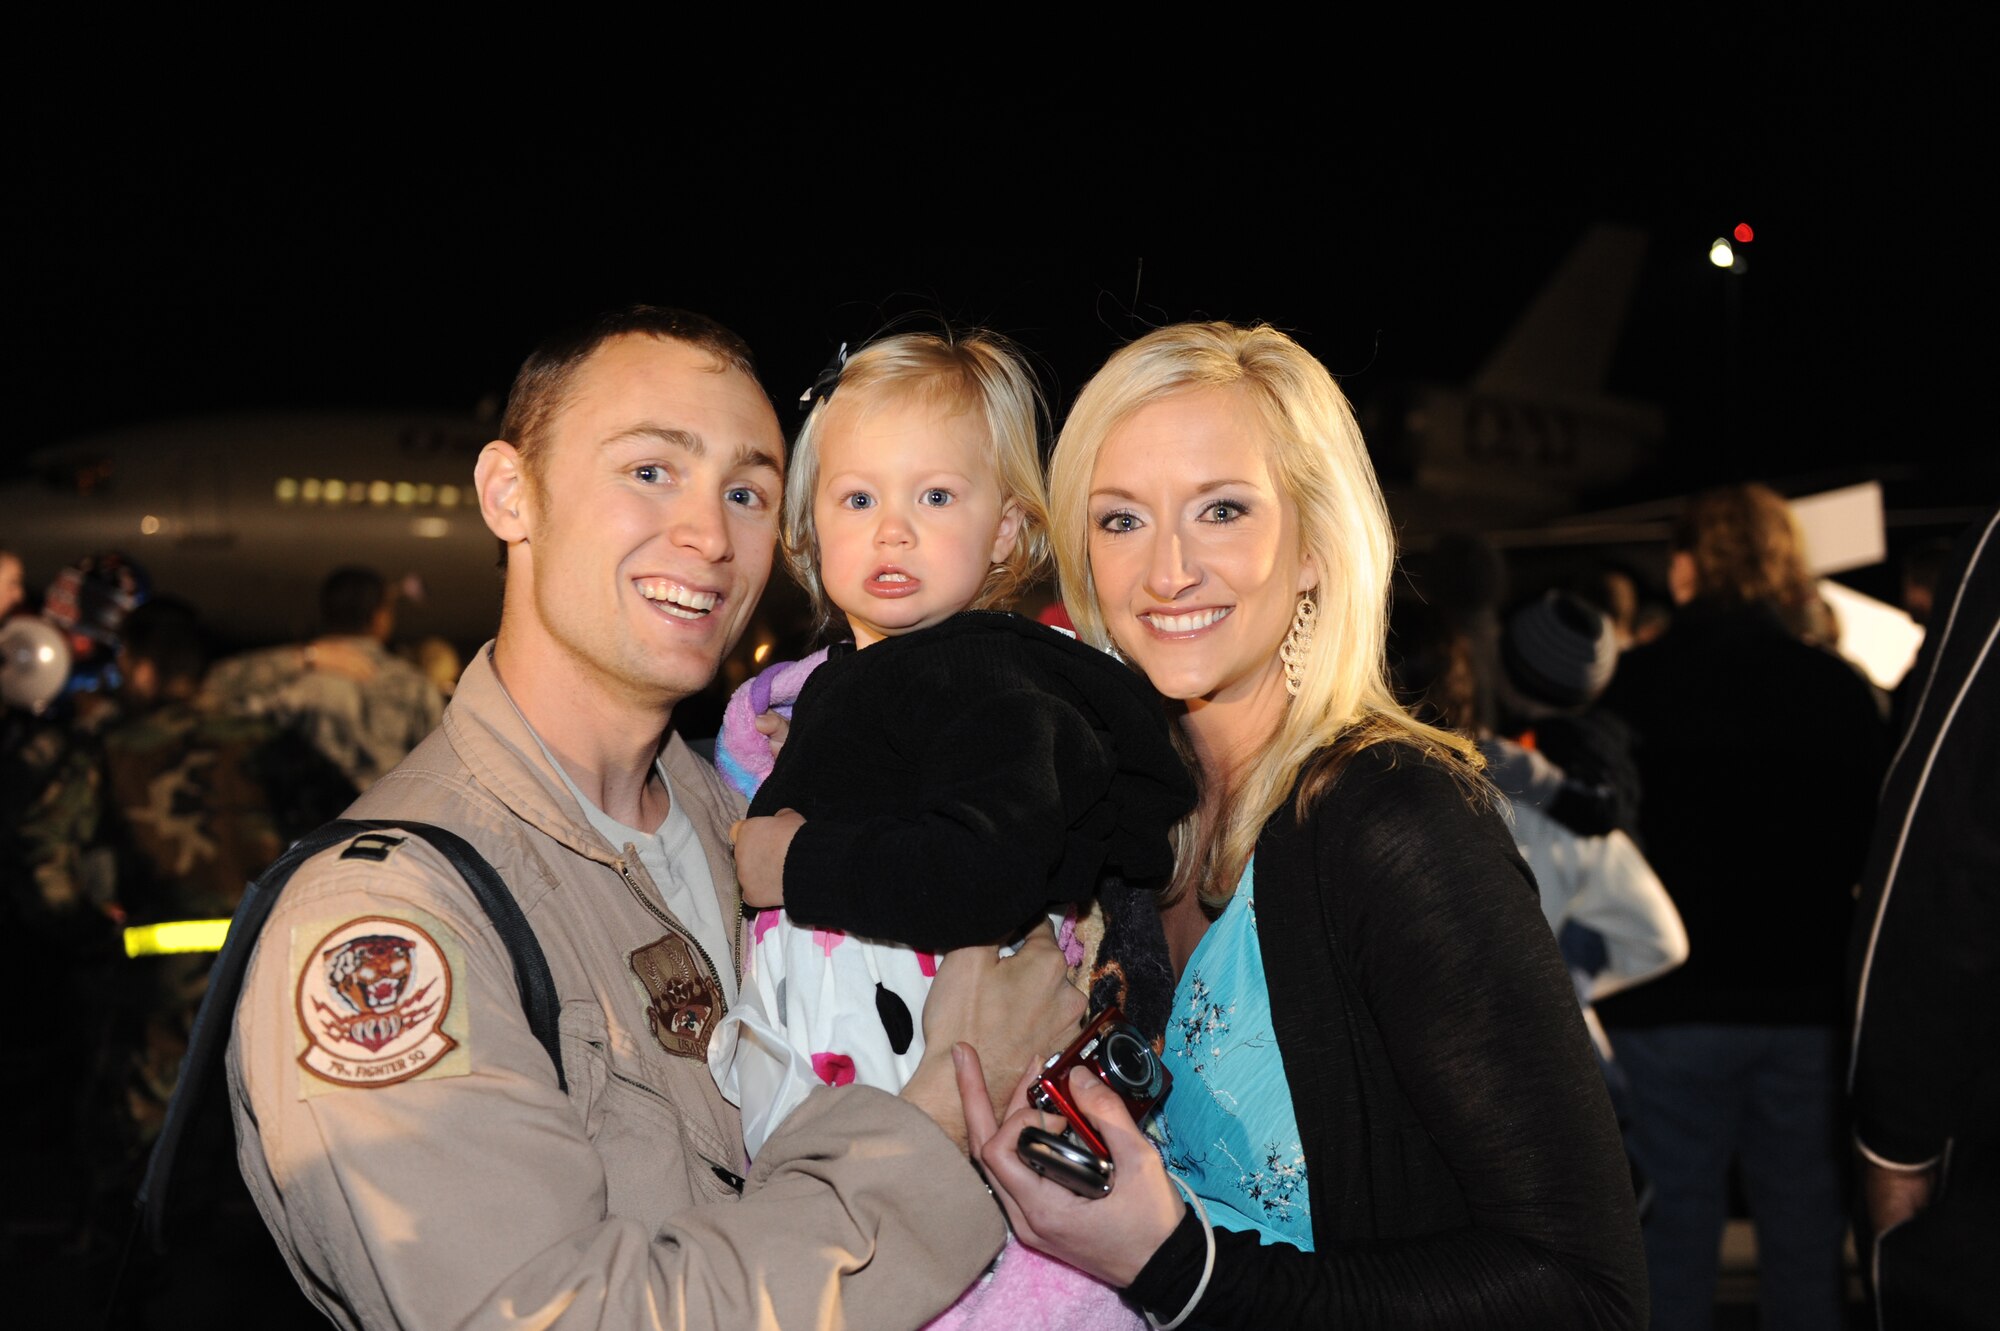 SHAW AIR FORCE BASE, S.C. -- Captain Corey Florendo reunites with his wife, Liz, and daughter, Maya. Hundreds of Airmen assigned to the 20th Fighter Wing returned this week after a four-month deployment in support of NATO efforts in Afghanistan.  (U.S. Air Force Photo/Tech. Sgt. Louis Rivers)